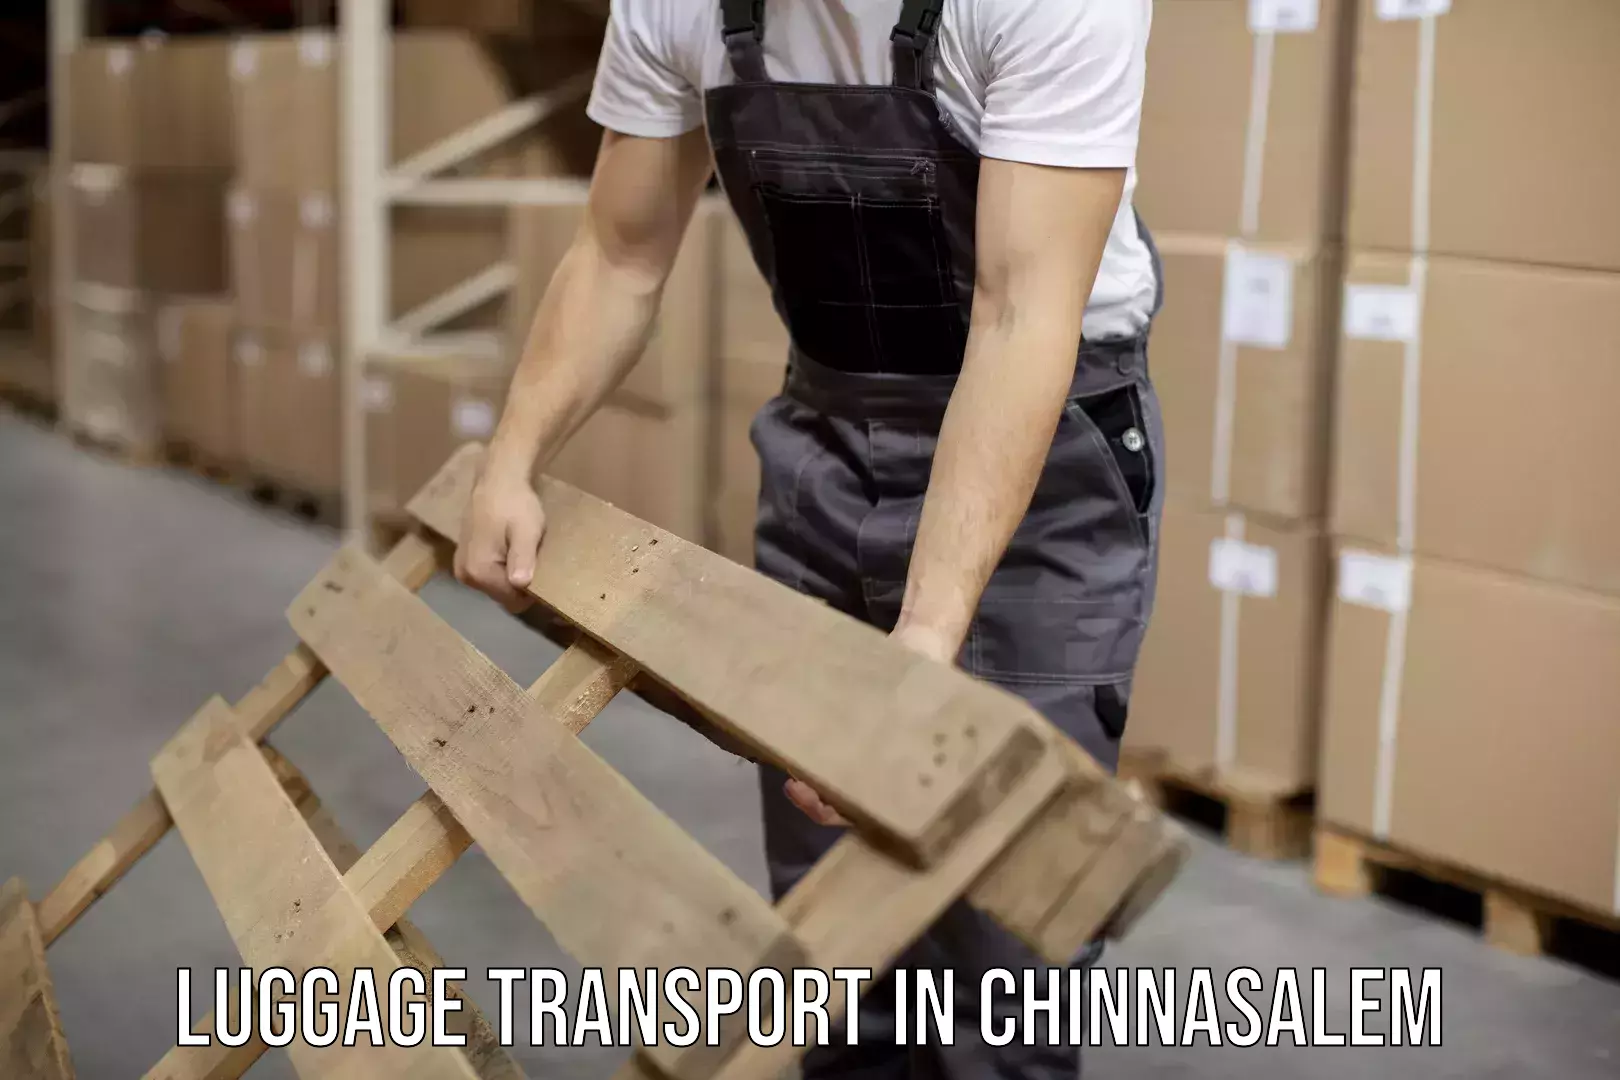 Luggage shipping management in Chinnasalem